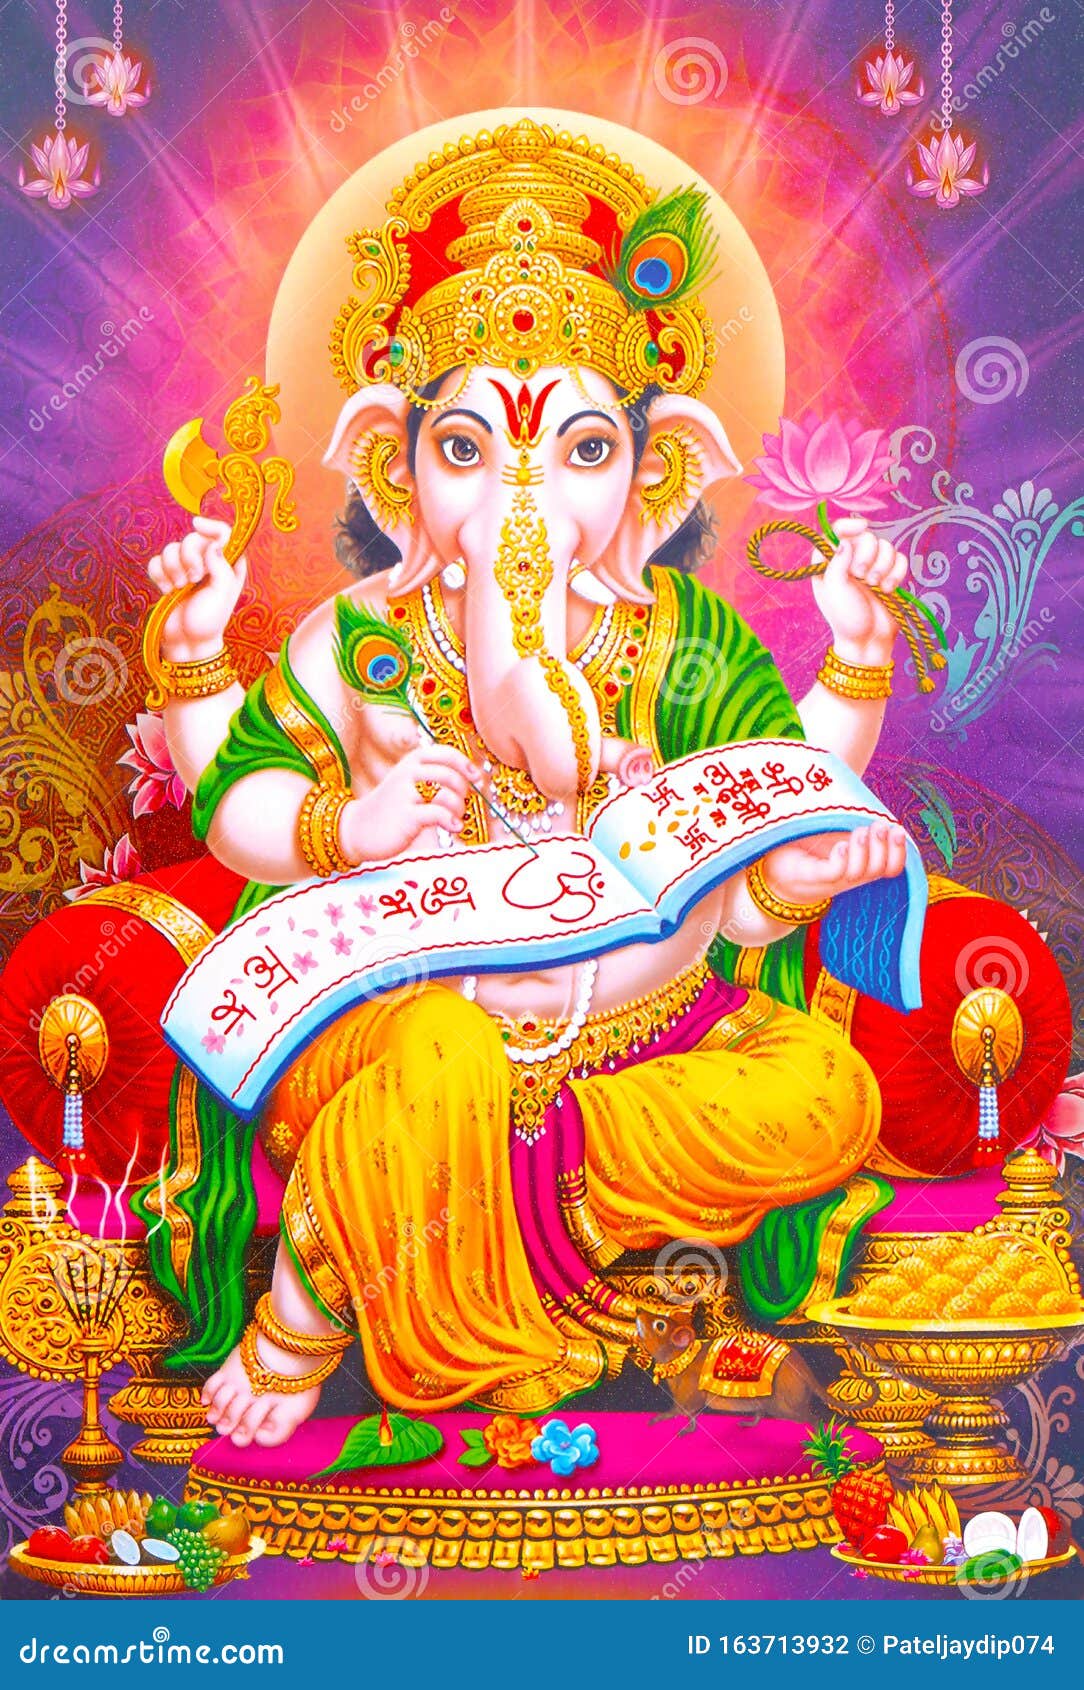 Hindu Lord Ganesha Texture Wallpaper Background Stock Photo - Image of  colorful, design: 163713932